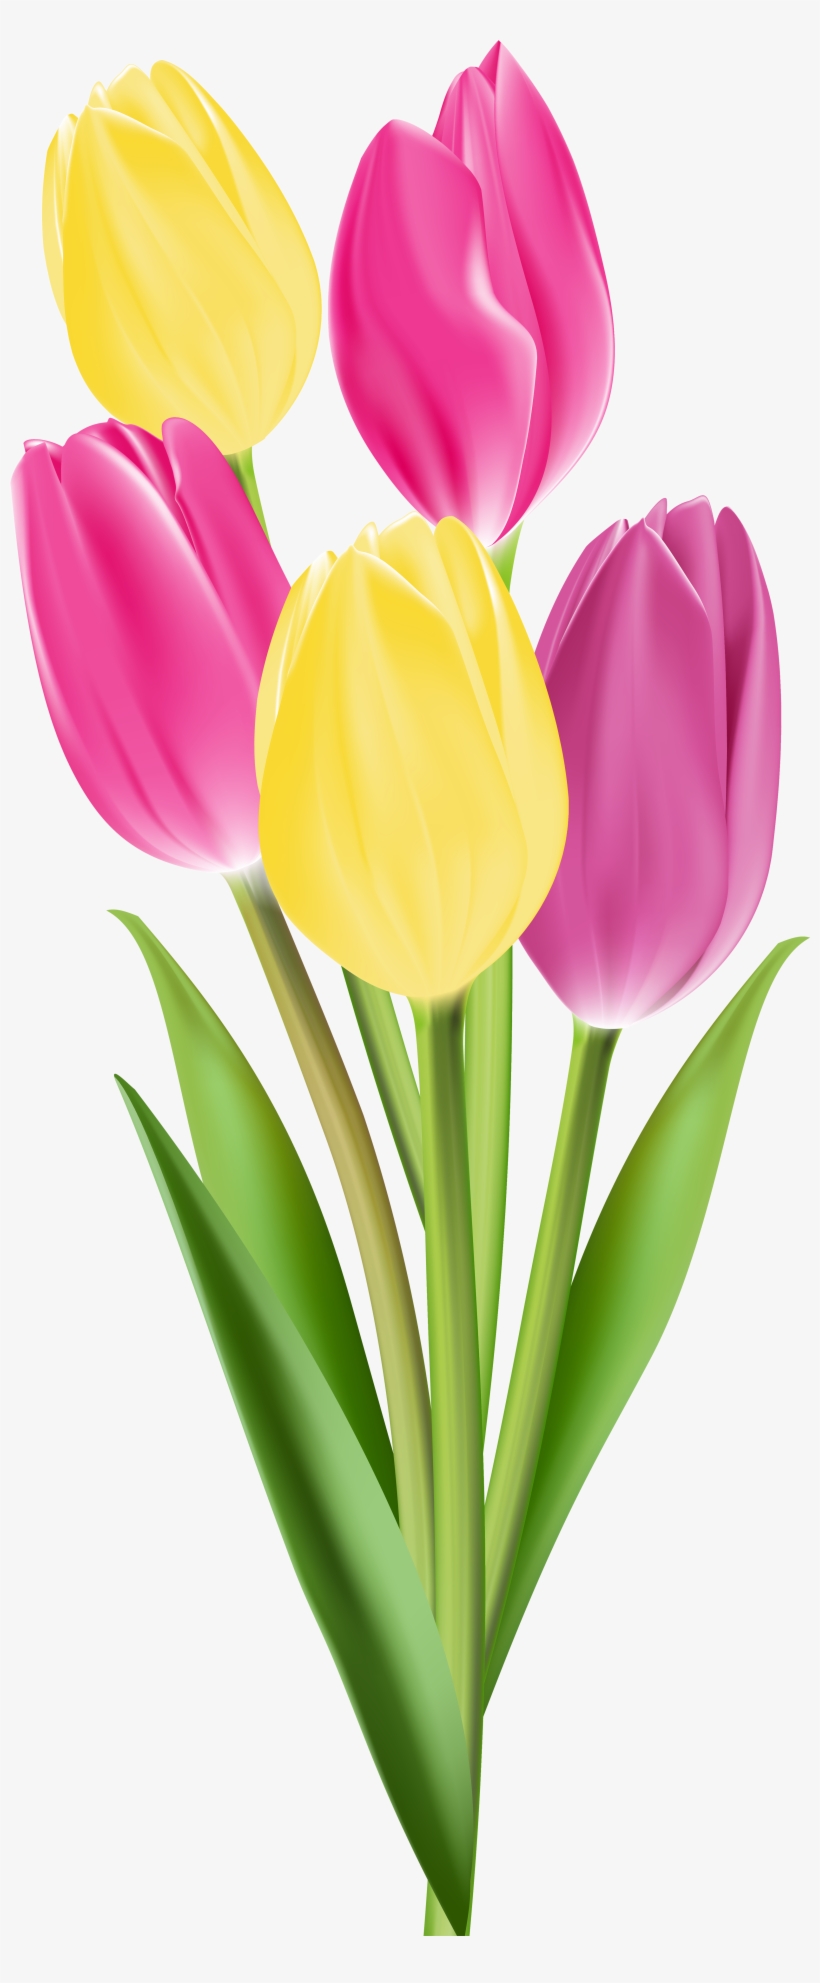 Flower Images, Flower Clips, Flower Art, Flower Crafts, - Yellow Single Tulip Png, transparent png #77844